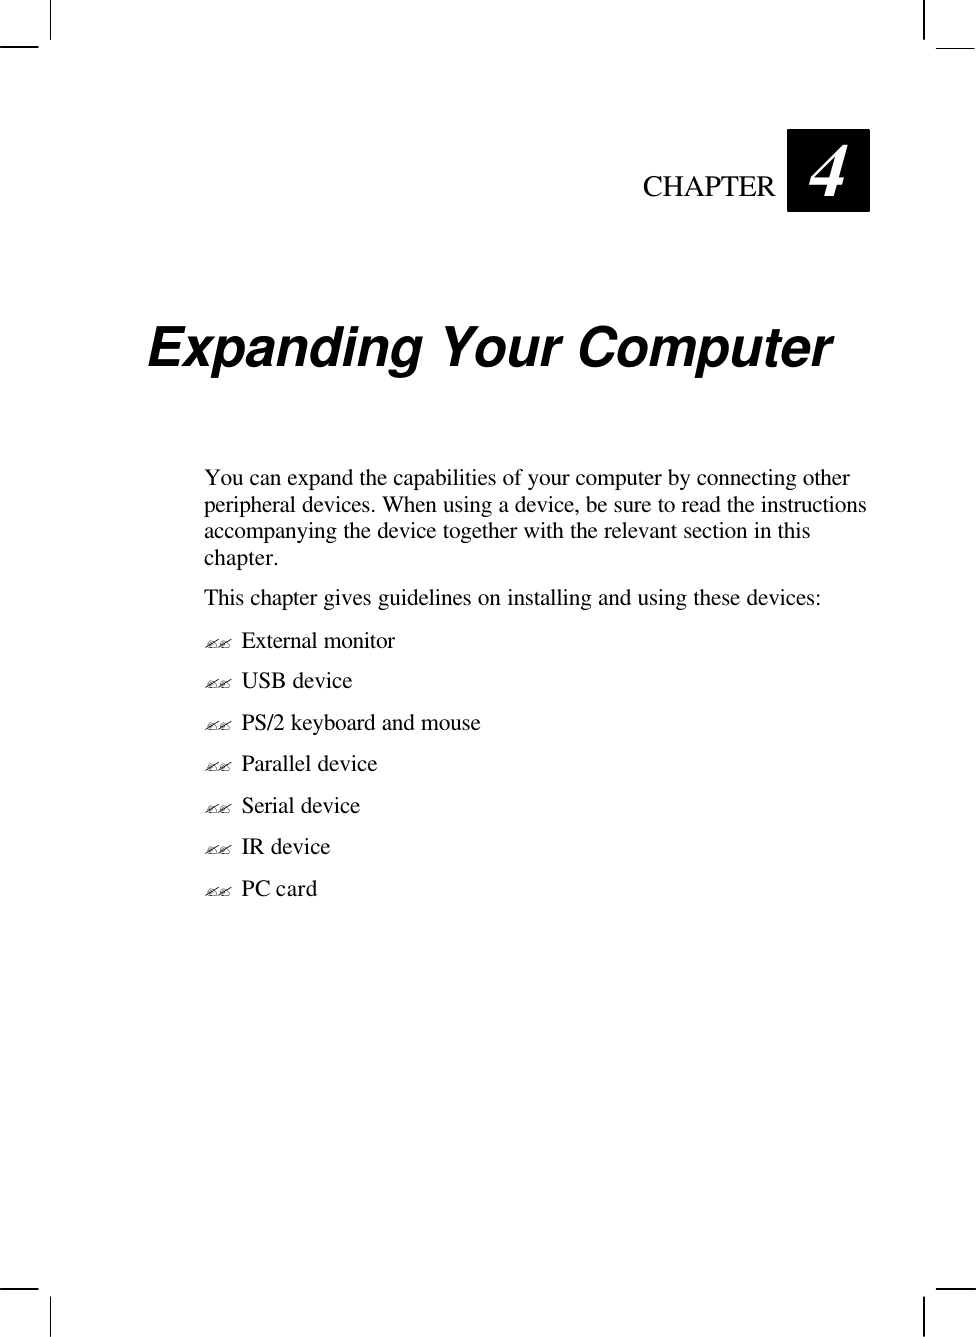   CHAPTER 4 Expanding Your Computer You can expand the capabilities of your computer by connecting other peripheral devices. When using a device, be sure to read the instructions accompanying the device together with the relevant section in this chapter. This chapter gives guidelines on installing and using these devices: ?? External monitor ?? USB device ?? PS/2 keyboard and mouse ?? Parallel device ?? Serial device ?? IR device ?? PC card  